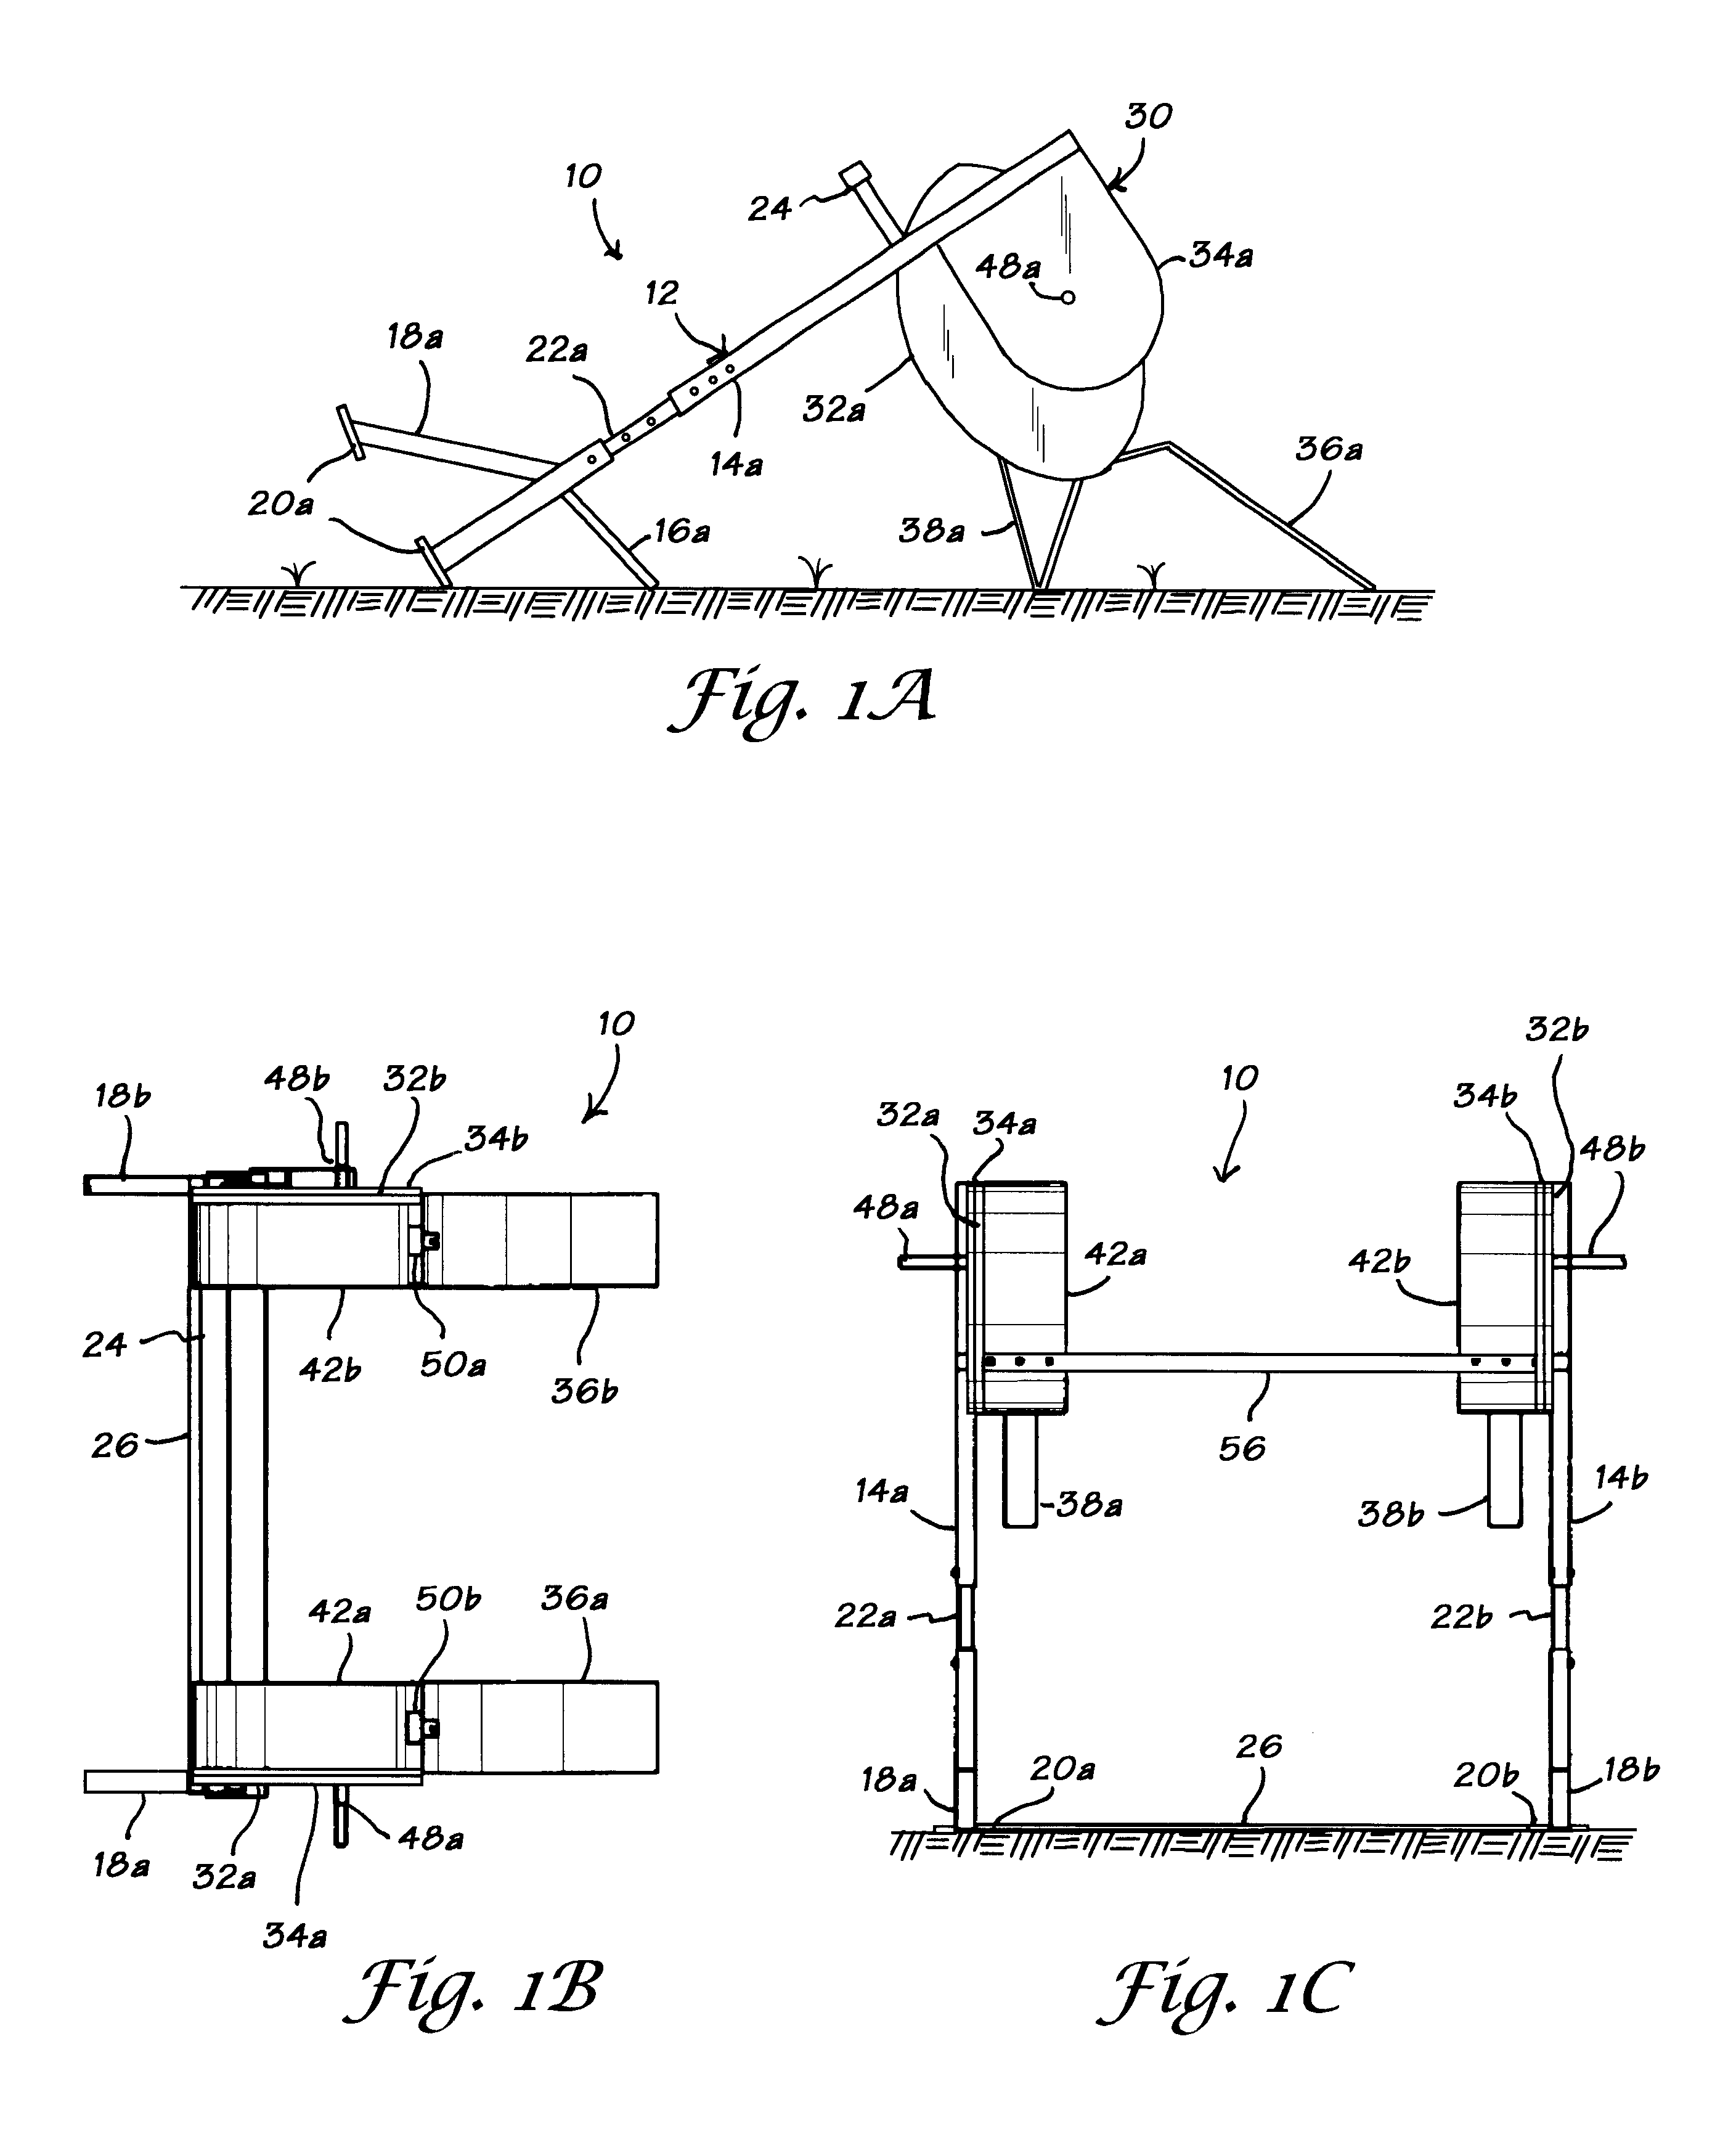 Lifting apparatus for small vehicles